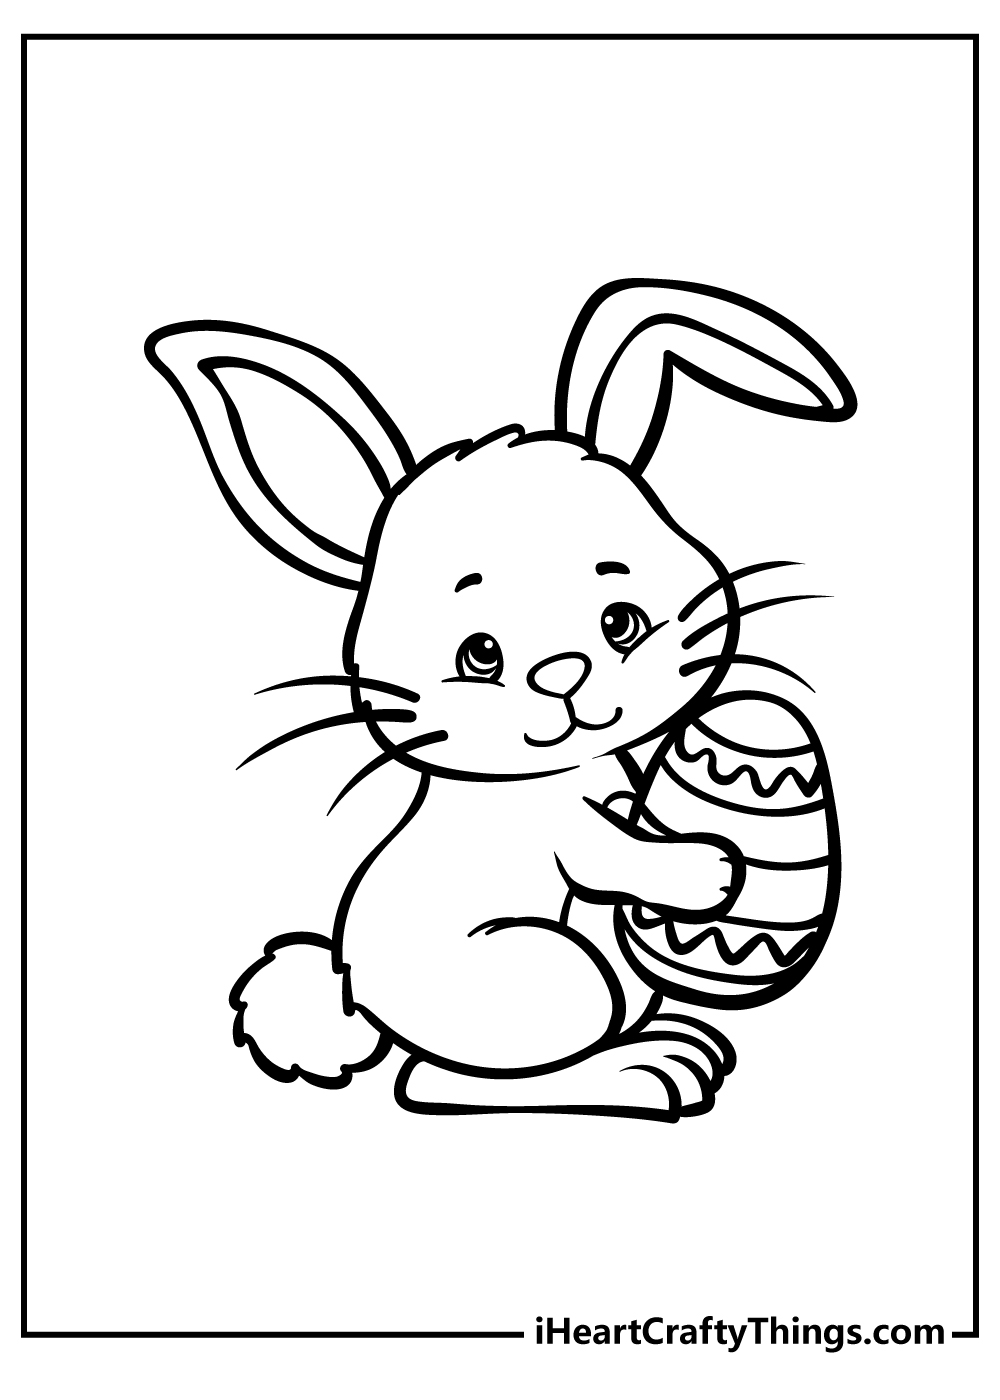 Easter Bunny coloring pages free printable